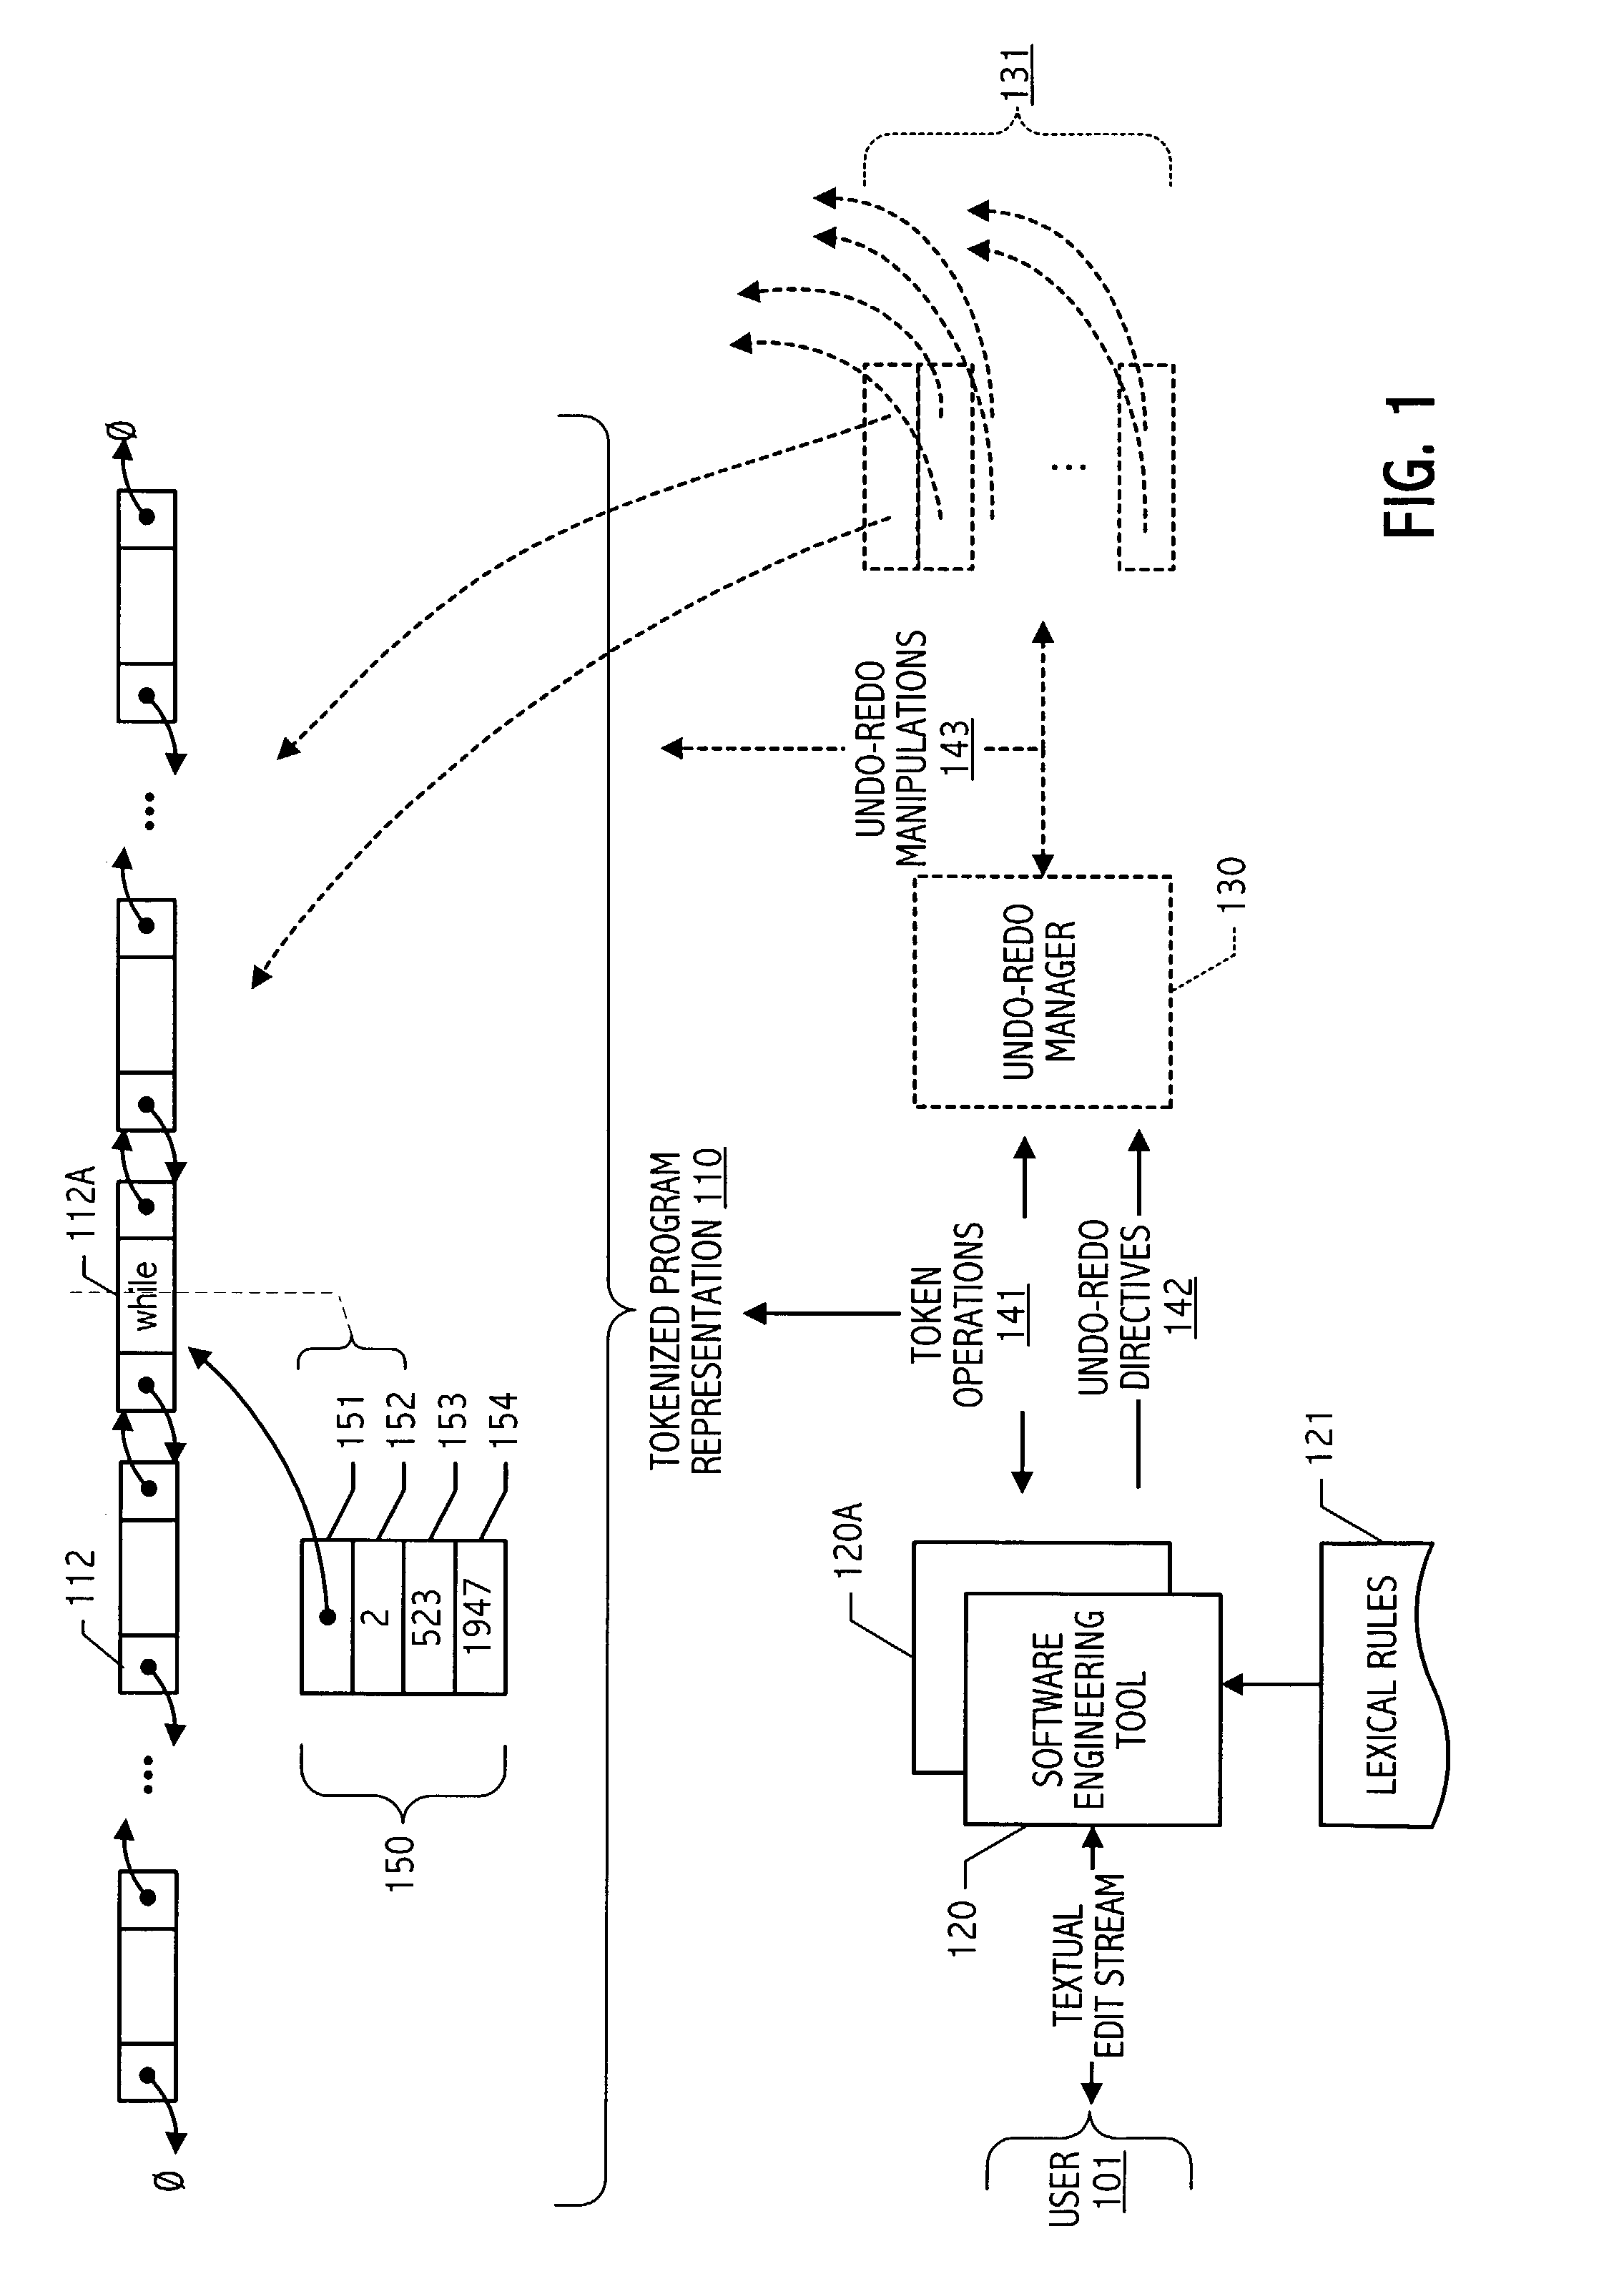 Token-oriented representation of program code with support for textual editing thereof